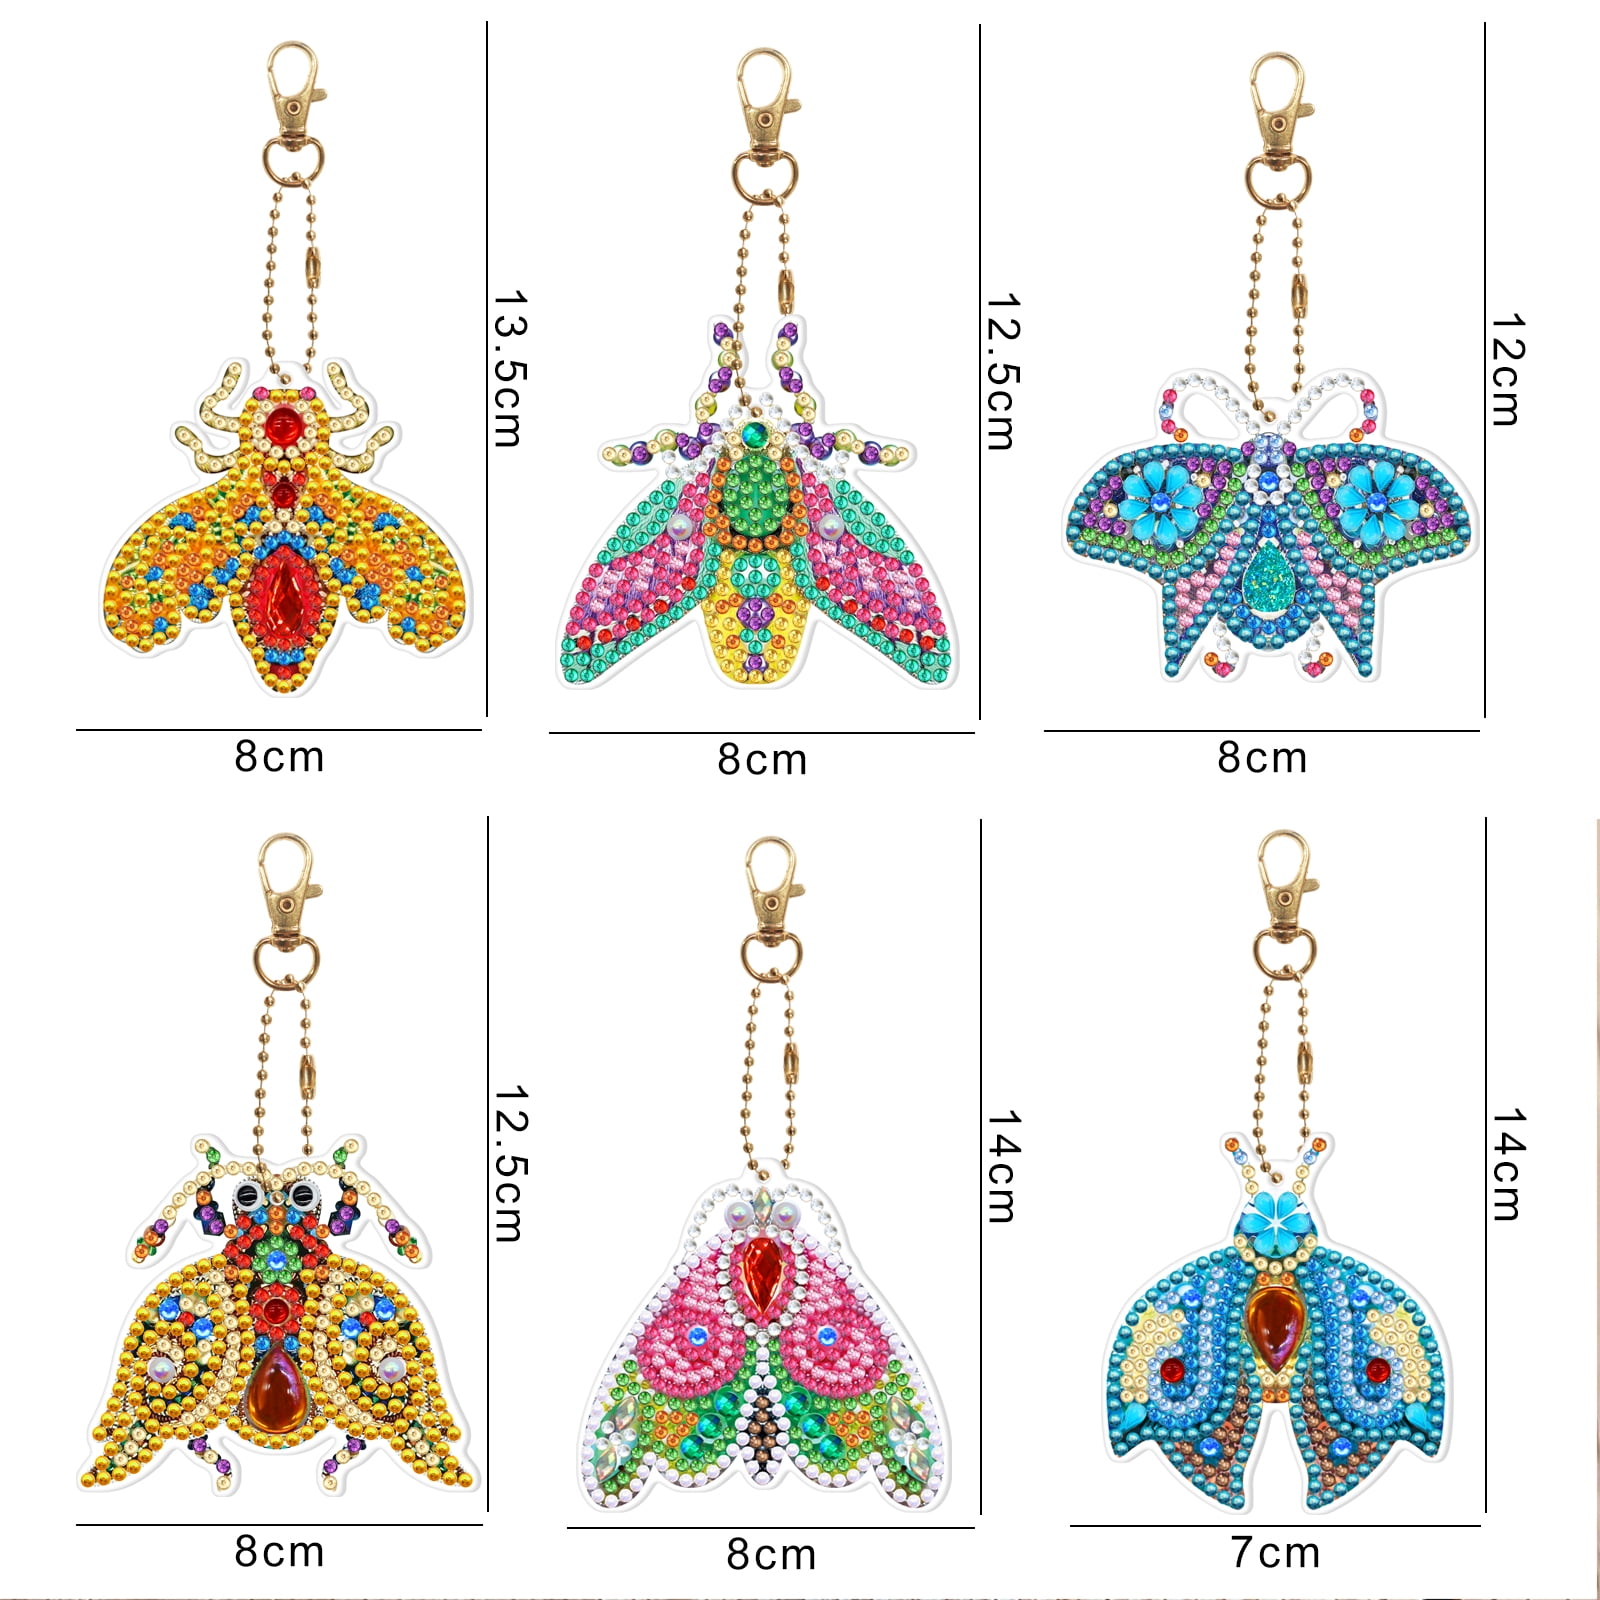 YALKIN Diamond Painting Keychain, 5D DIY Diamond Painting Kits for Kids  Adult, Special Shaped Full Drill Double-Side Diamond Key Ring Set Diamond  Pendant Kits for Backpack Shoulder Bag Accessories 